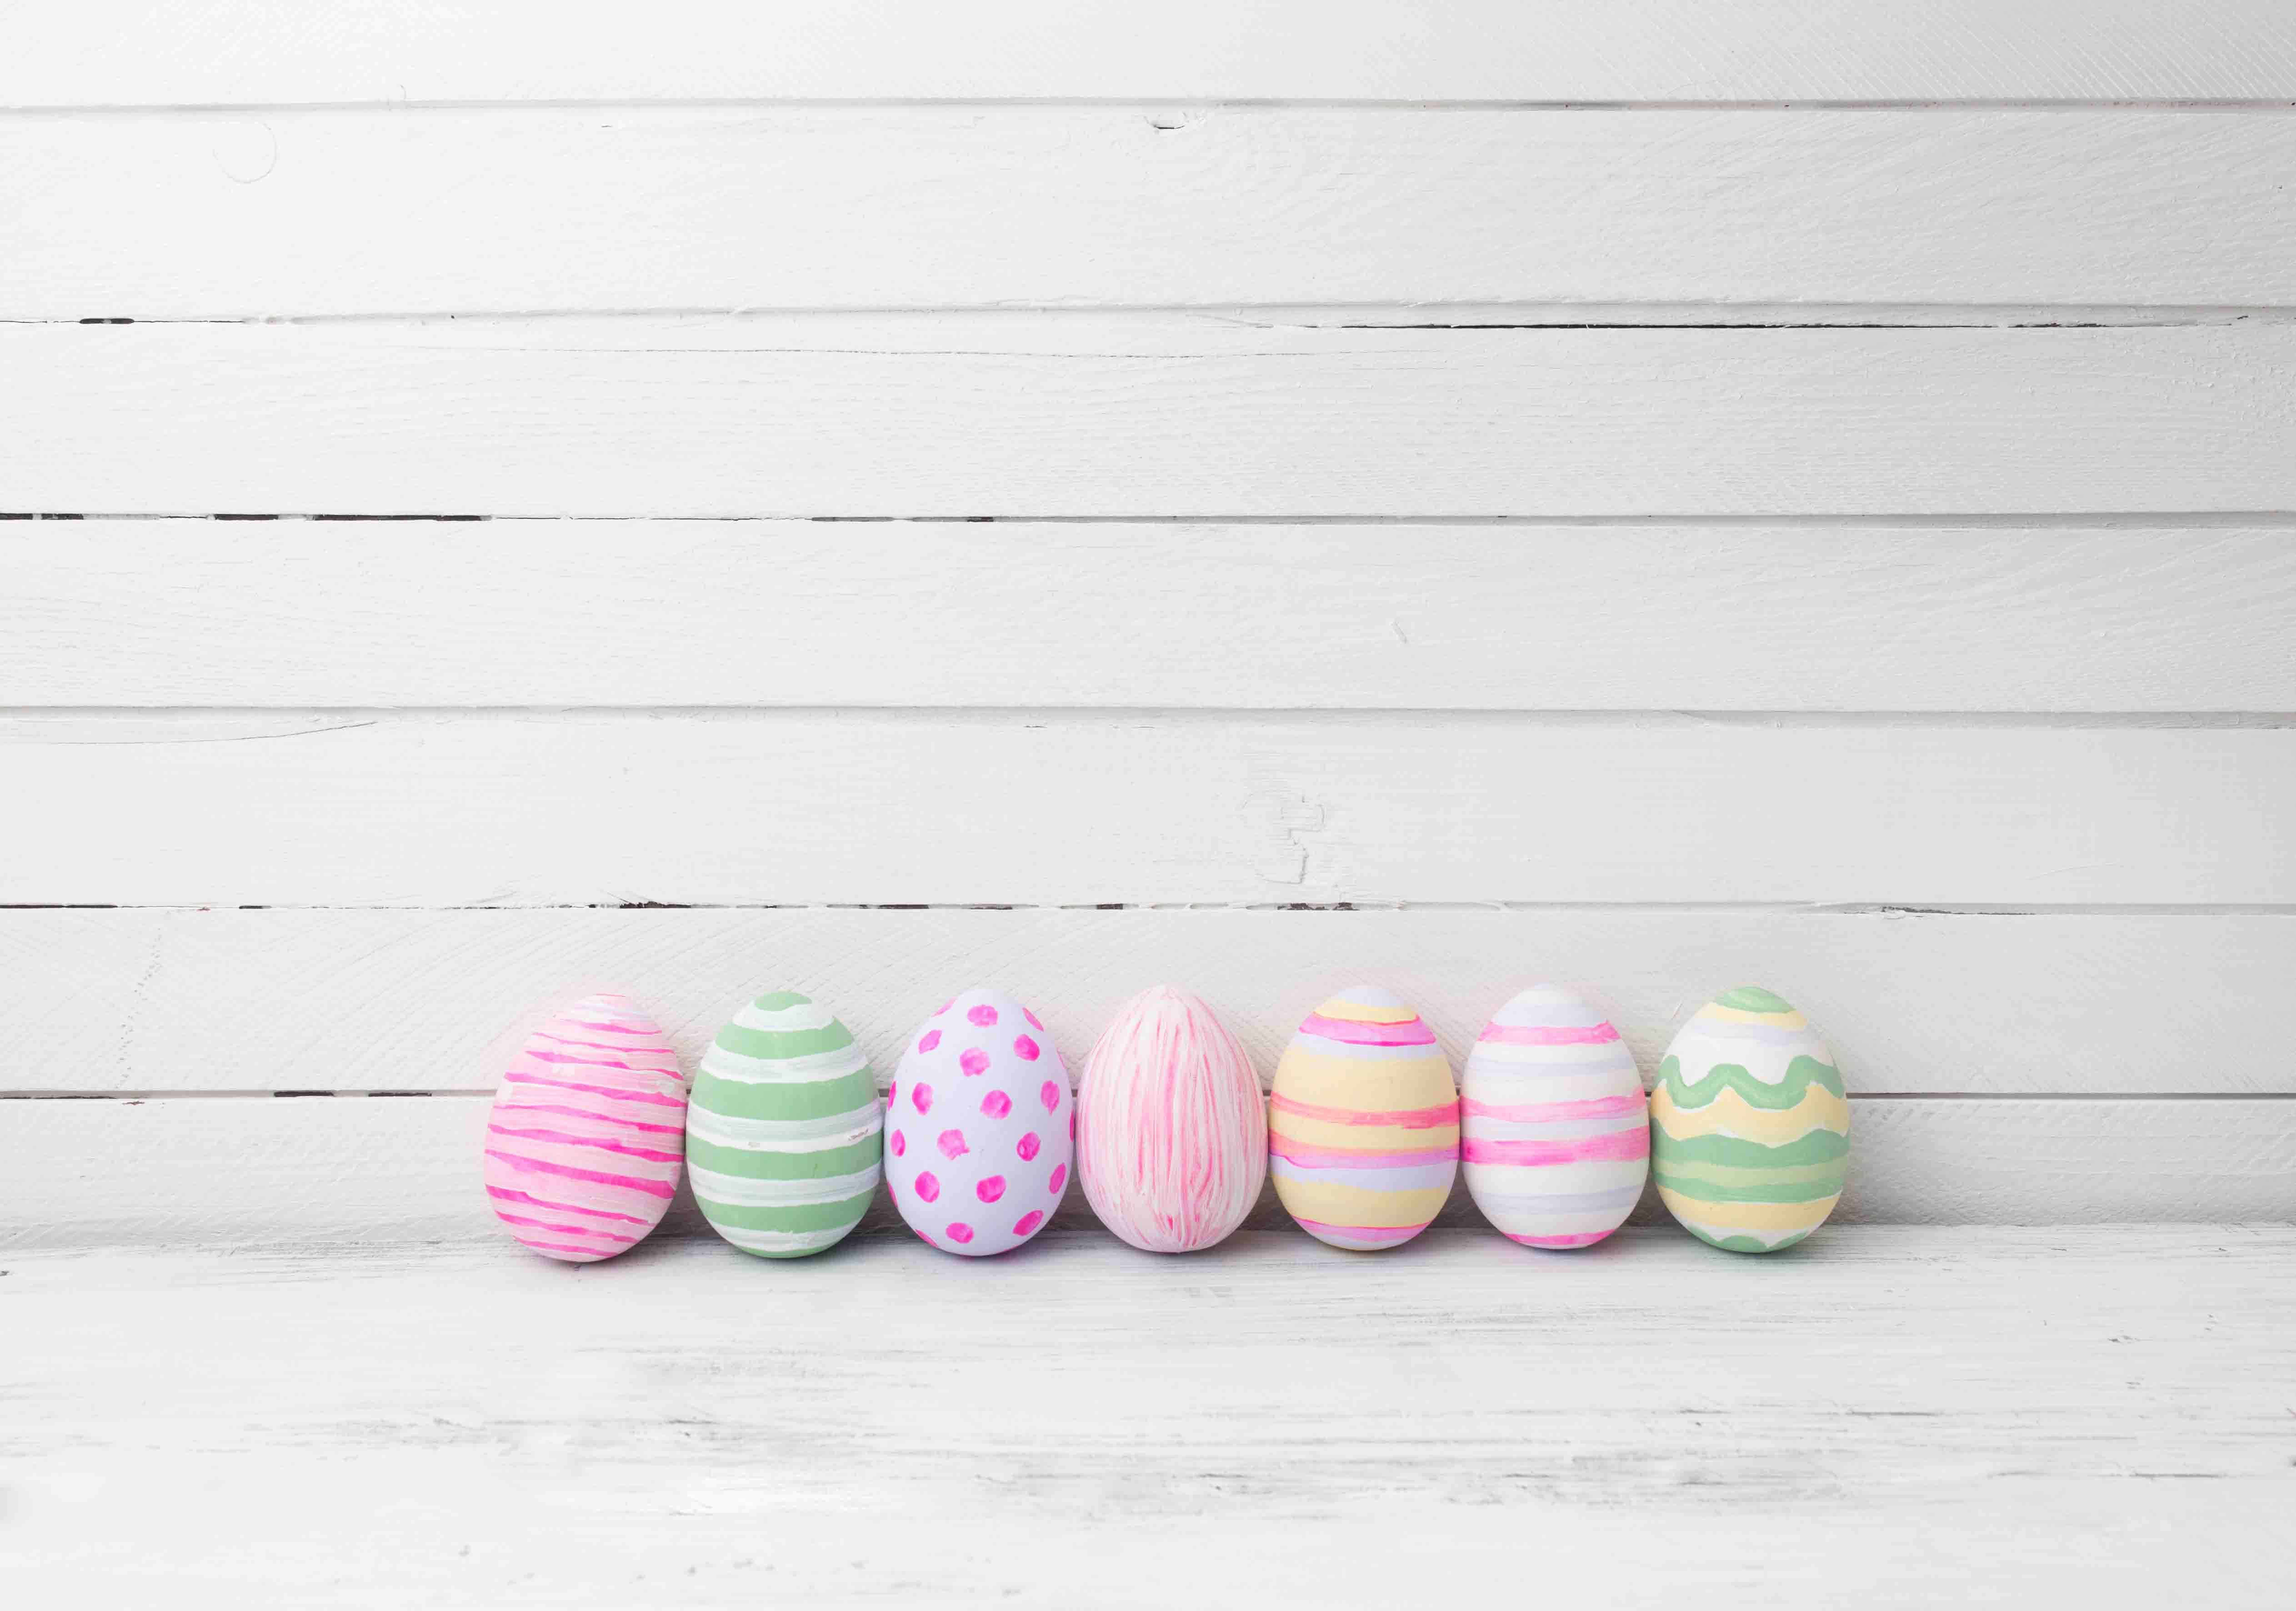 Easter Colorful Eggs On White Floor With Wood Wall Texture Backdrop For Photography Shopbackdrop